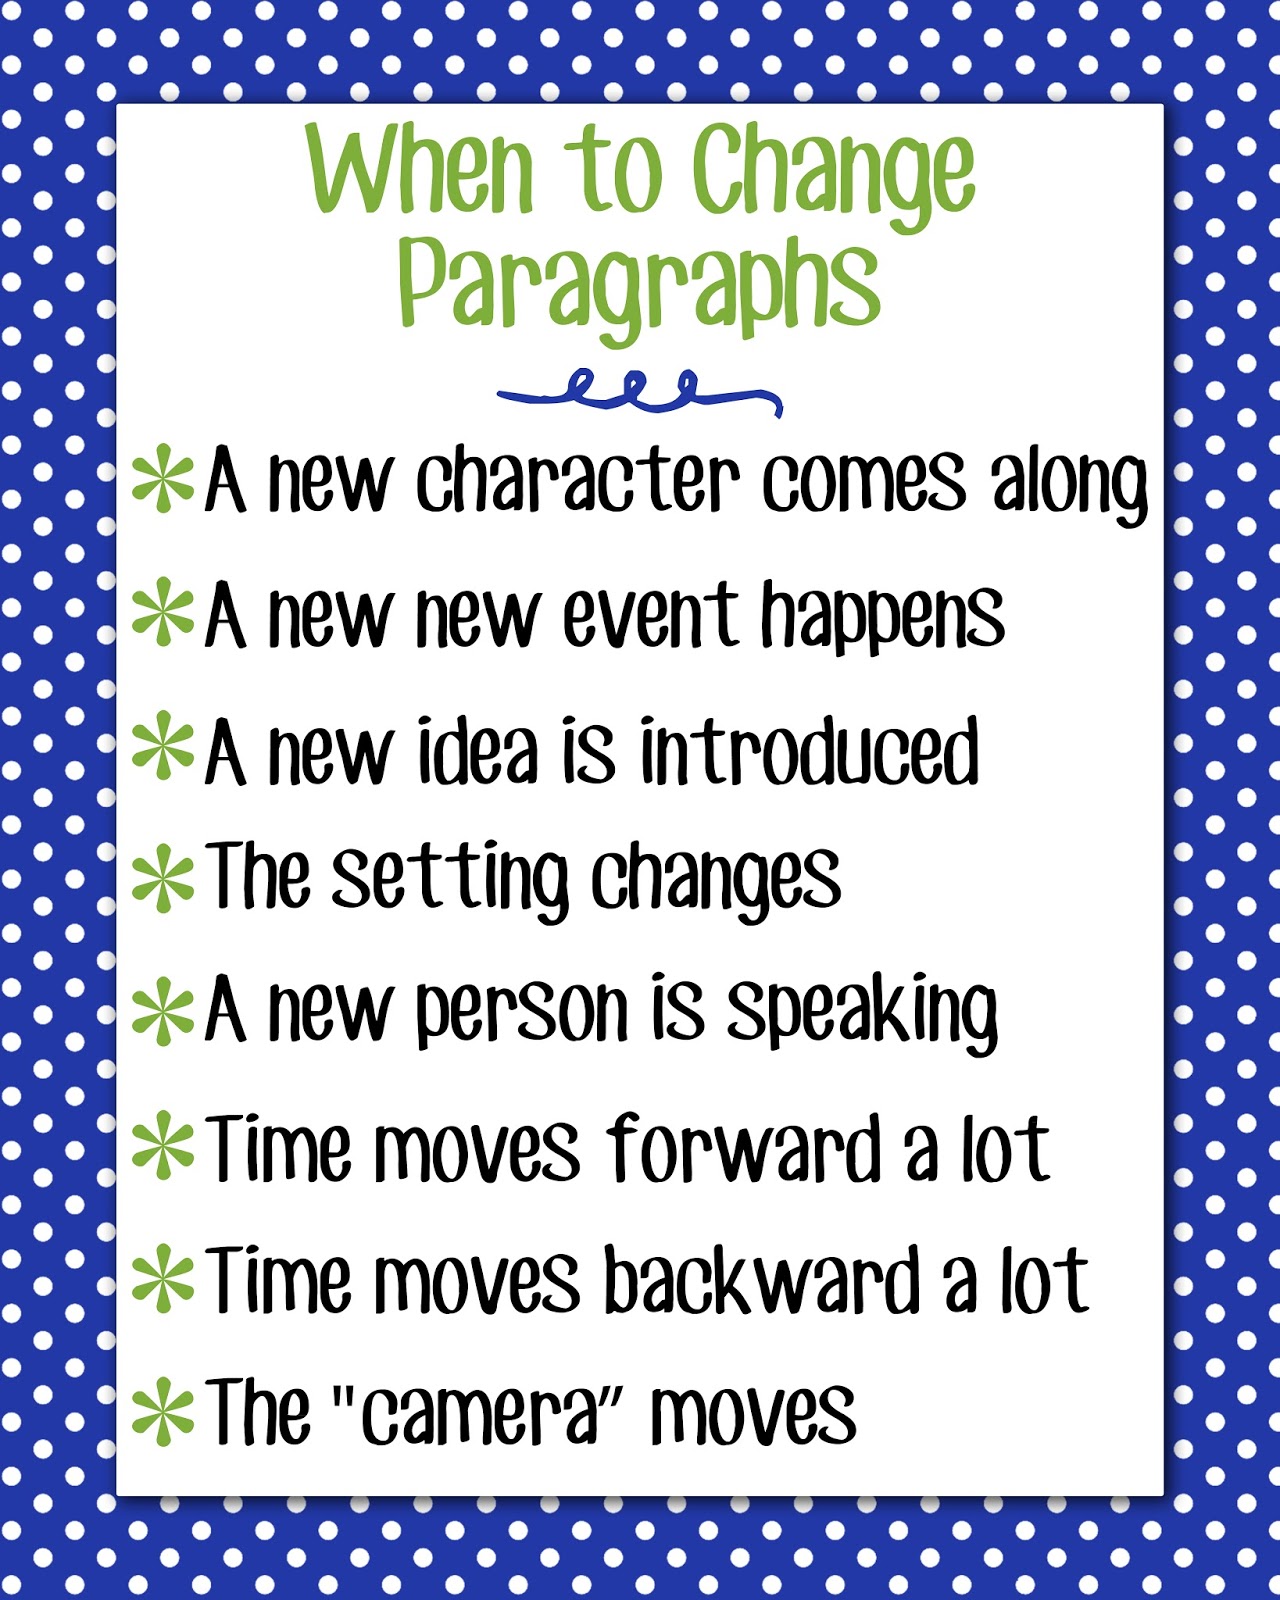 When to Change Paragraphs